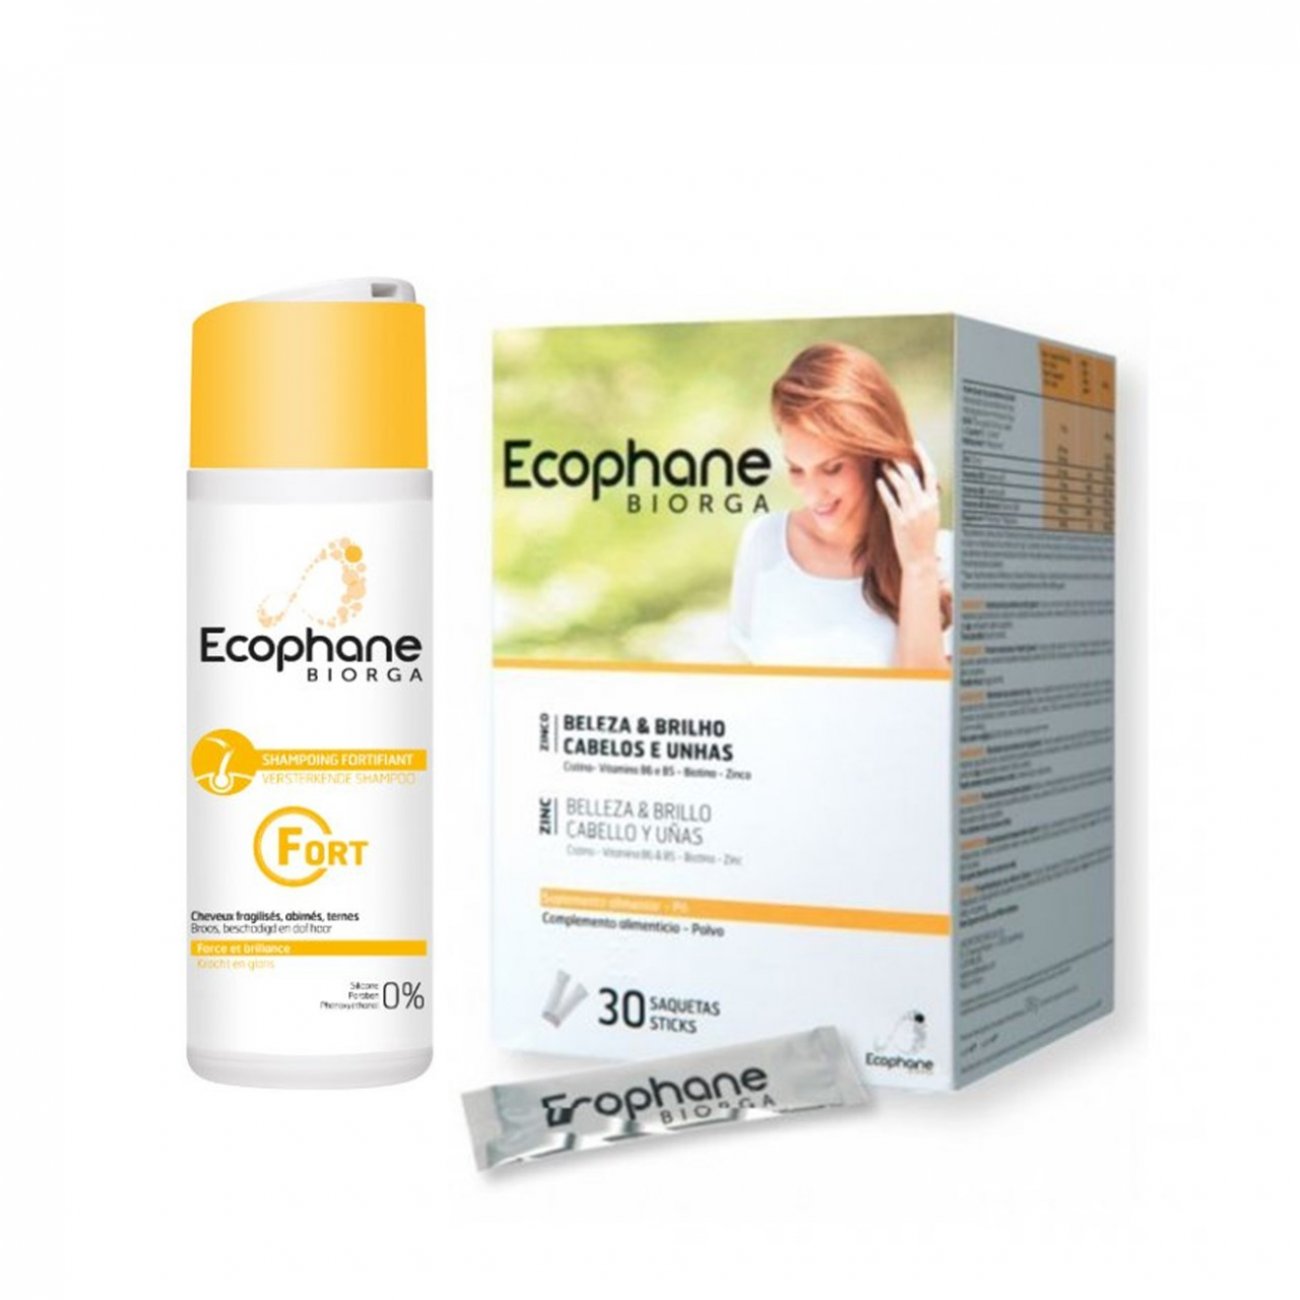 PROMOTIONAL PACK:ECOPHANE Fortifying Powder Sachets x30 + Fortifying Shampoo 200ml